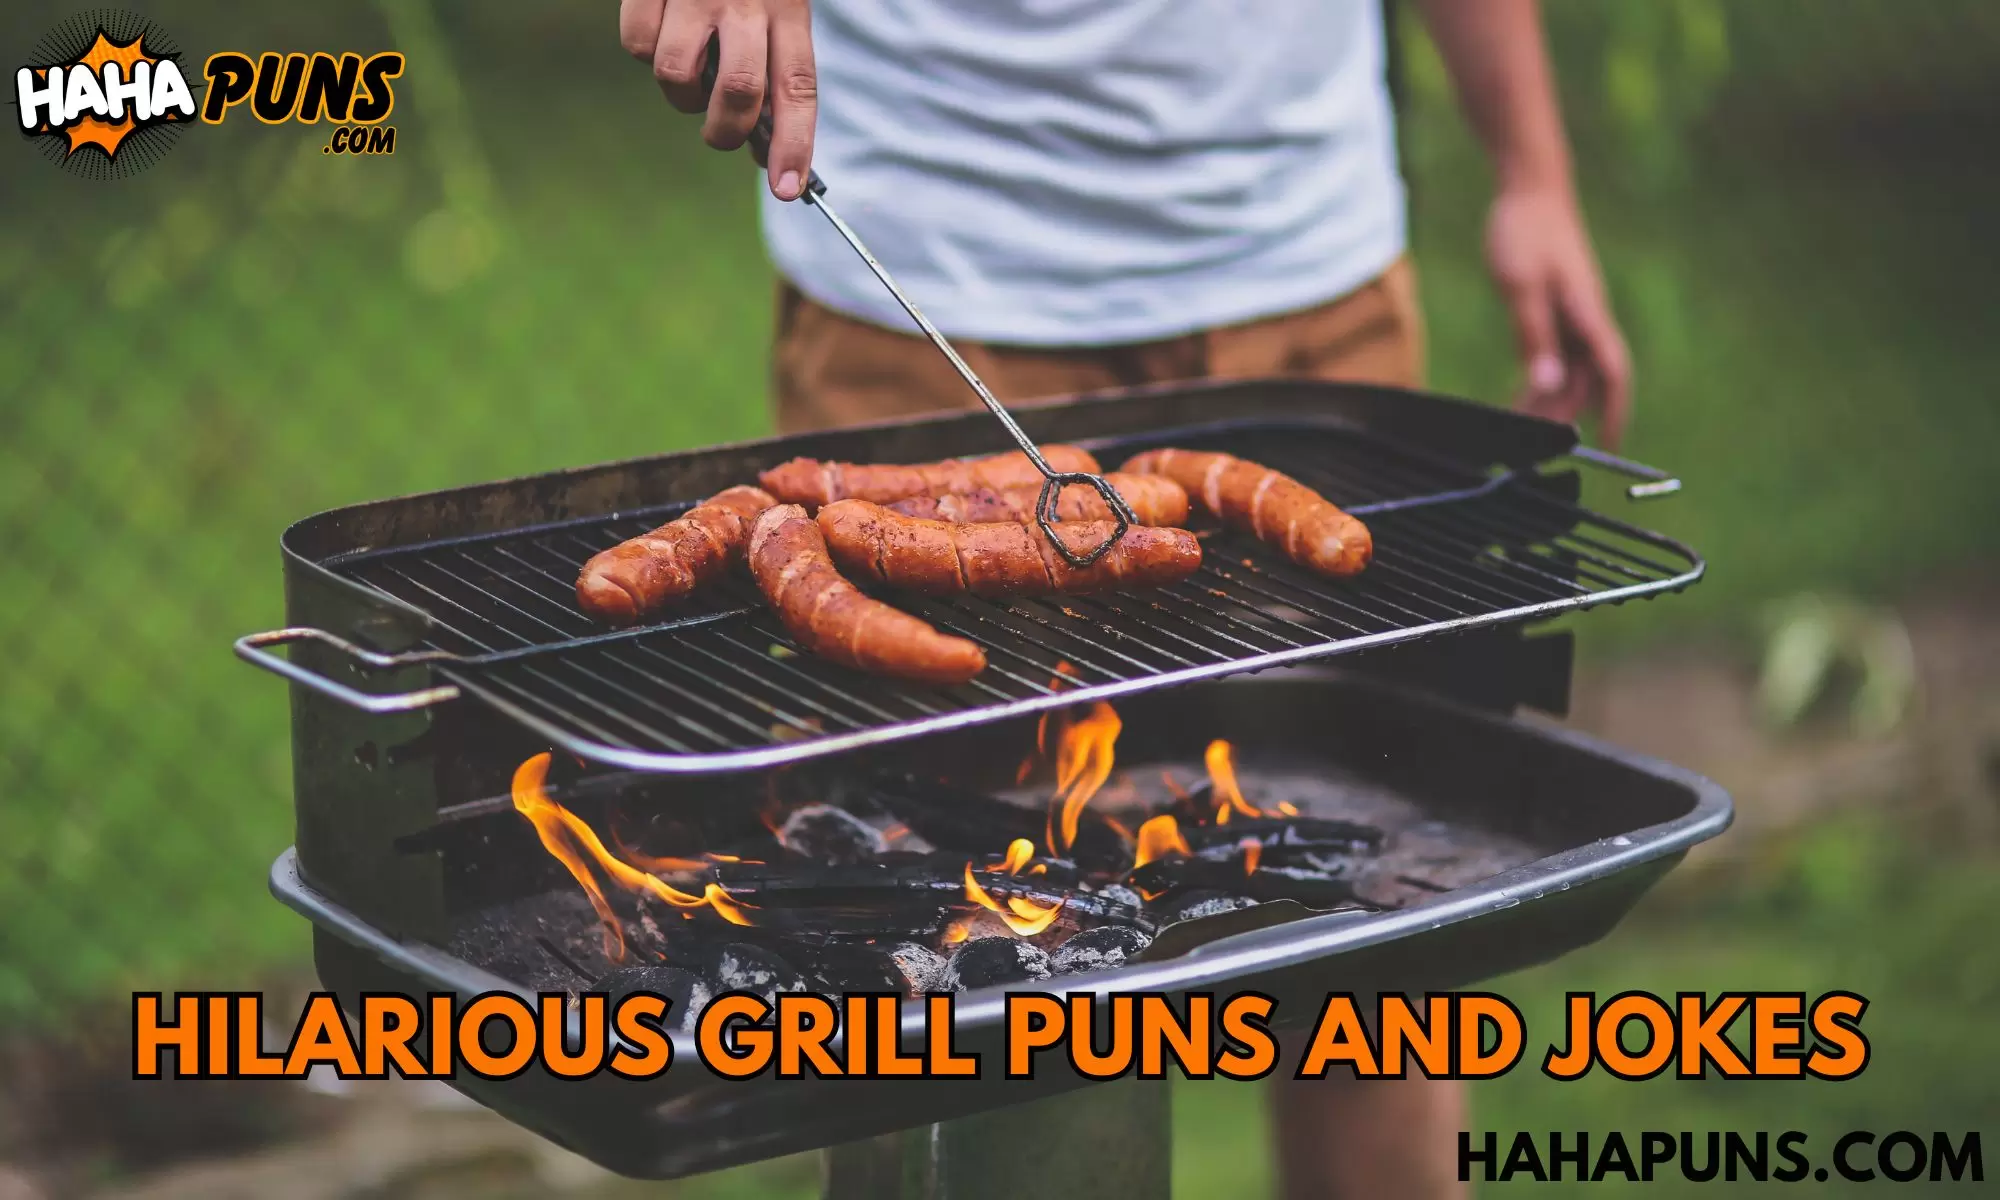 Hilarious Grill Puns And Jokes